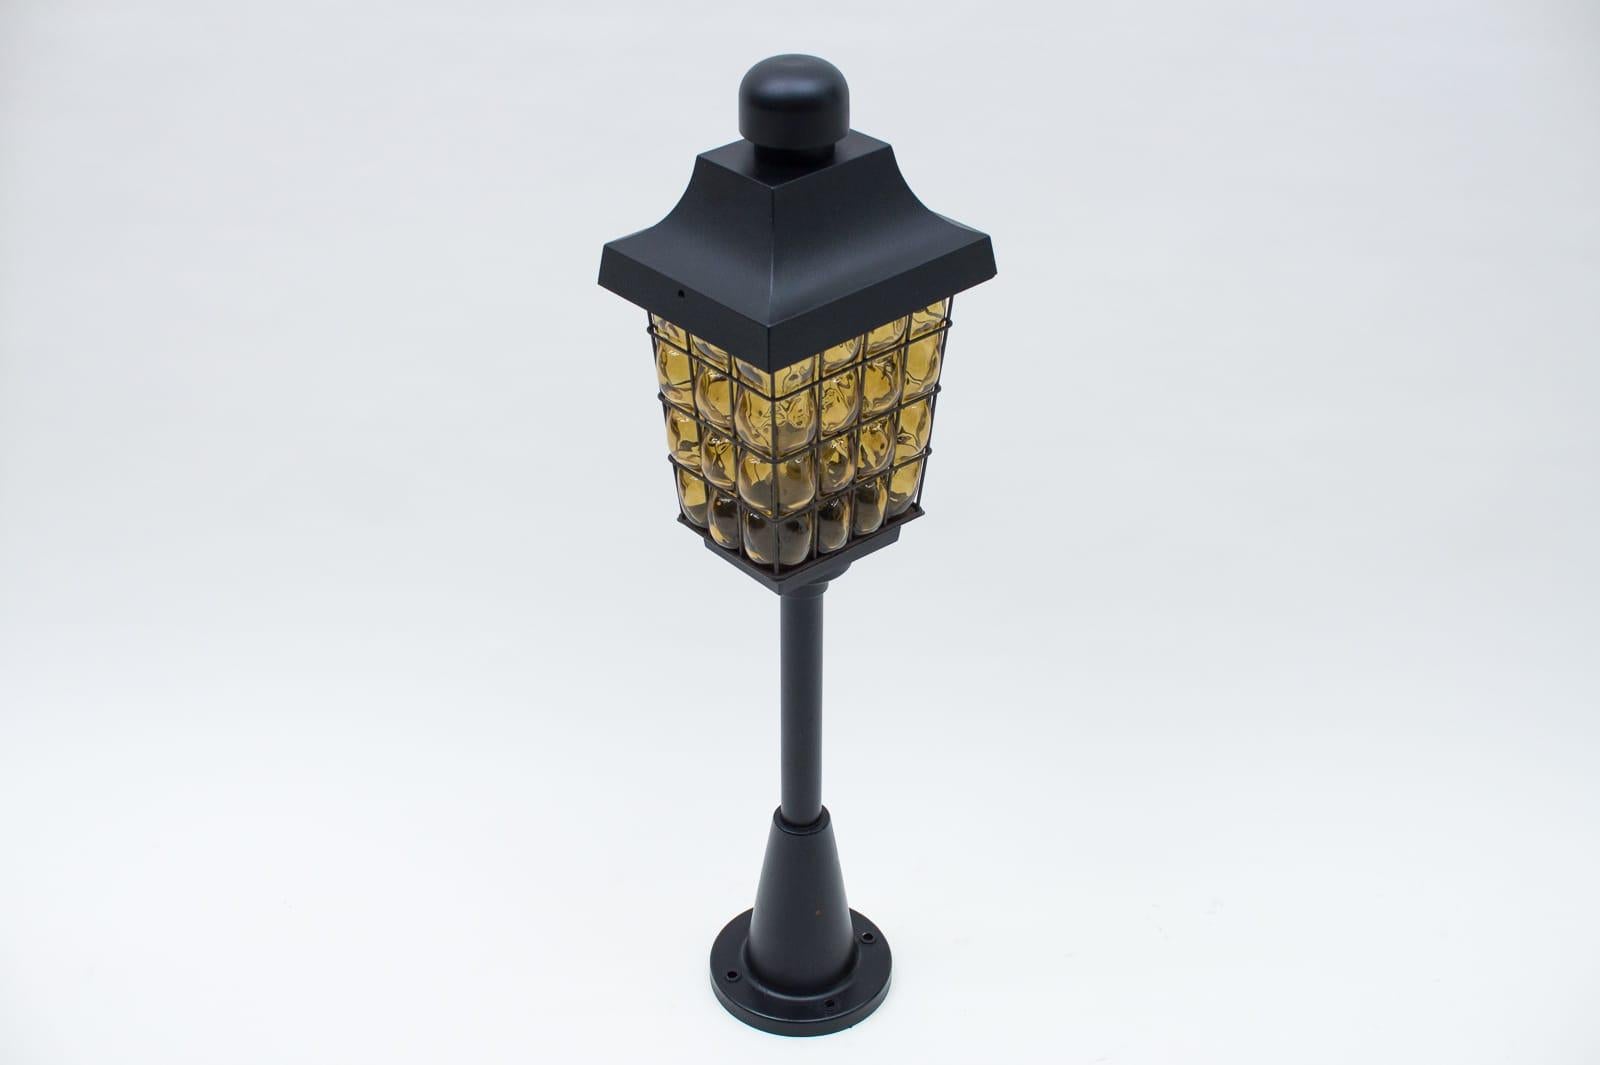 Executed in copper sheet, each lamp comes with 1 x E27 Edison screw fit bulb holder, is wired and in working condition. It runs both on 110/230 Volt.

Measures: Width 23.5 cm
Depth 18 cm
Height 84 cm.

Fully functional.

With an E27 socket. Works